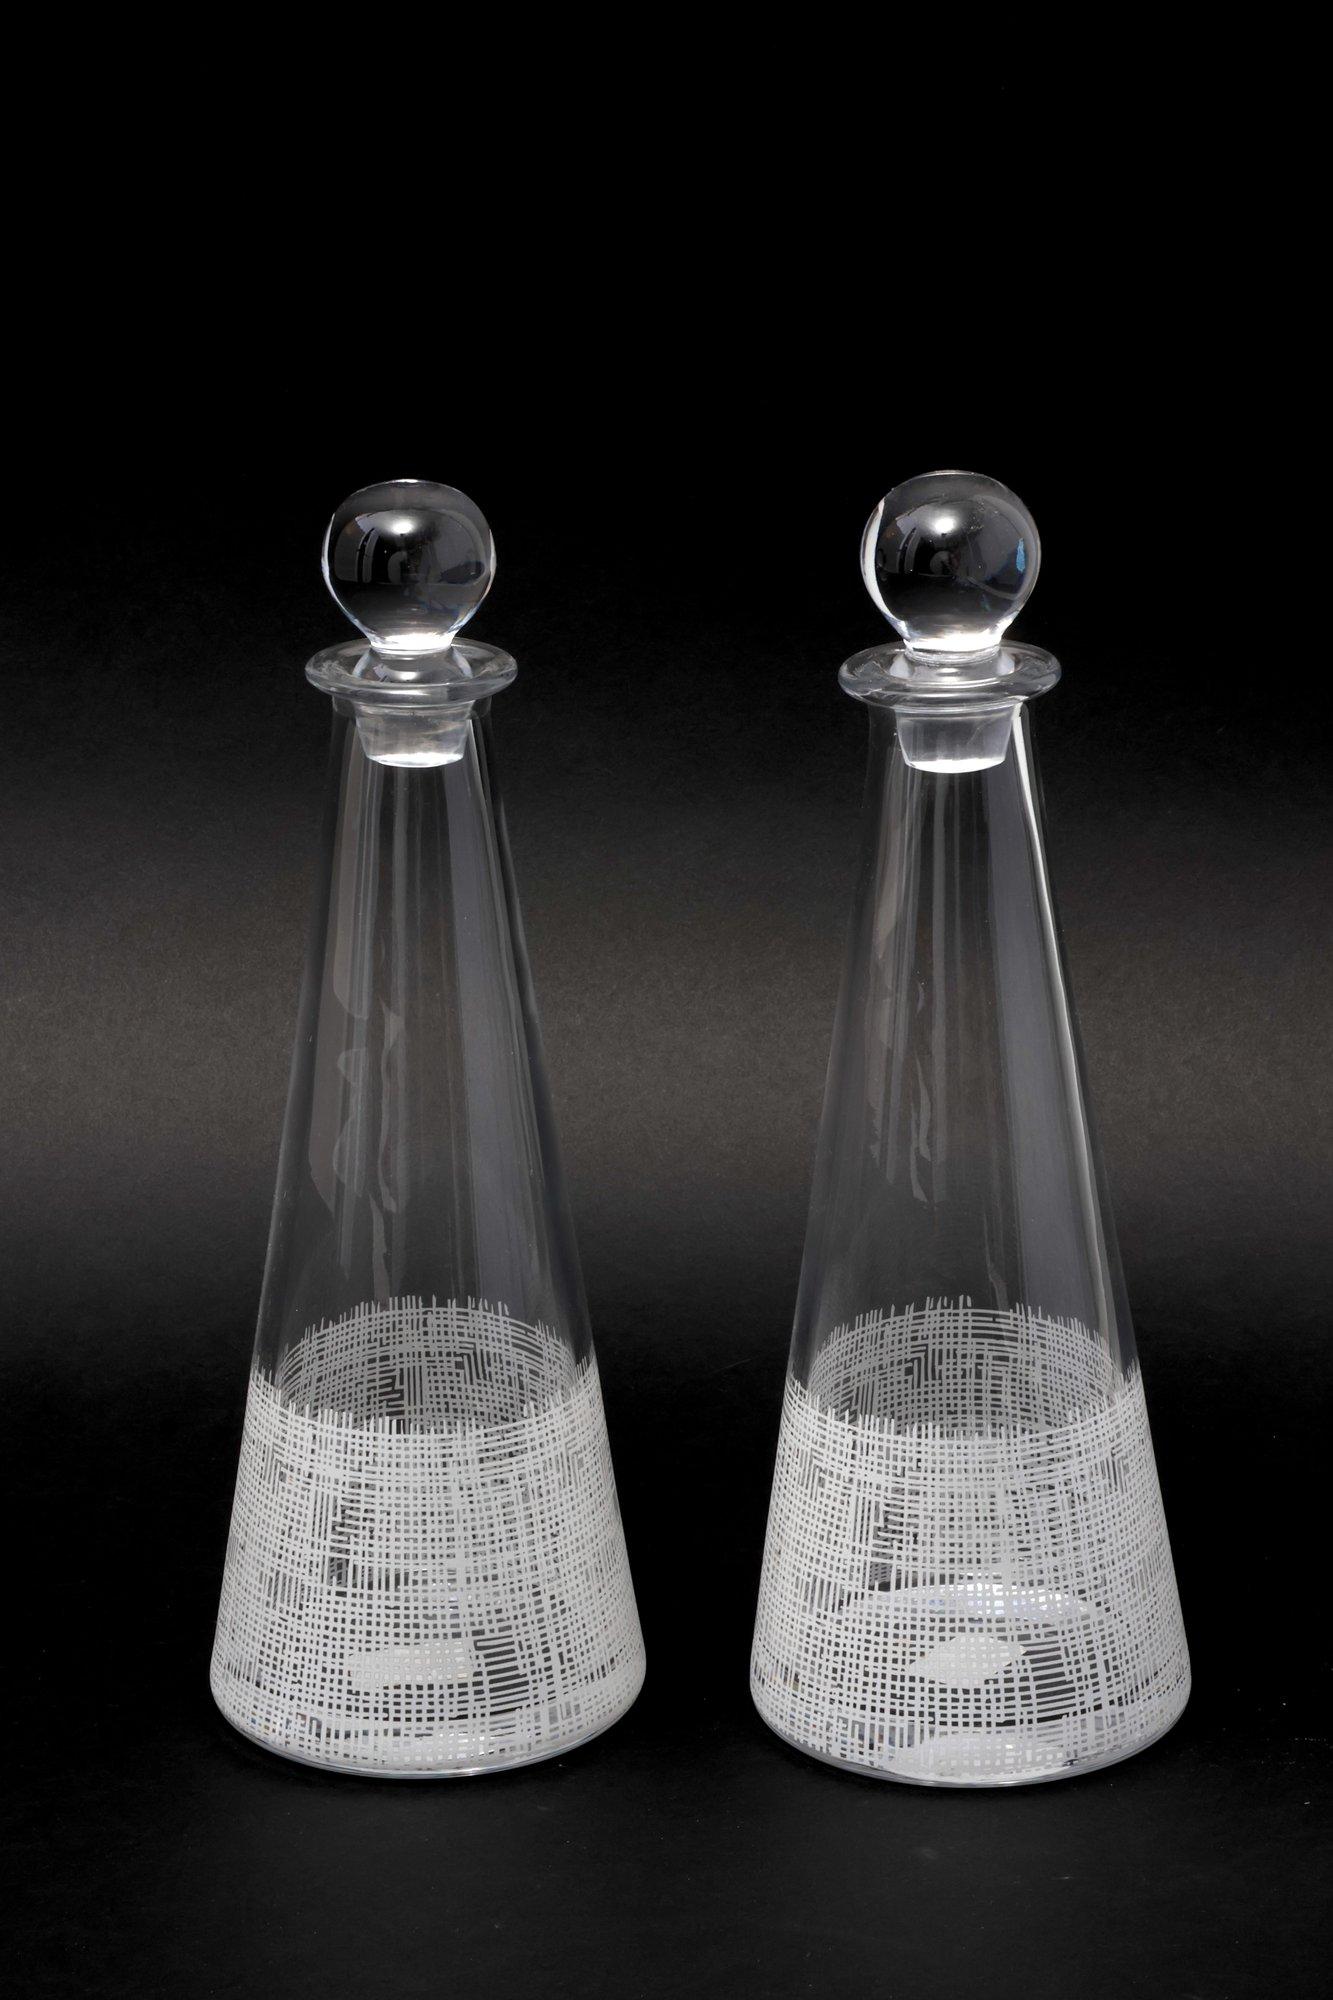 Pair Of Champange Glasses With Decanter